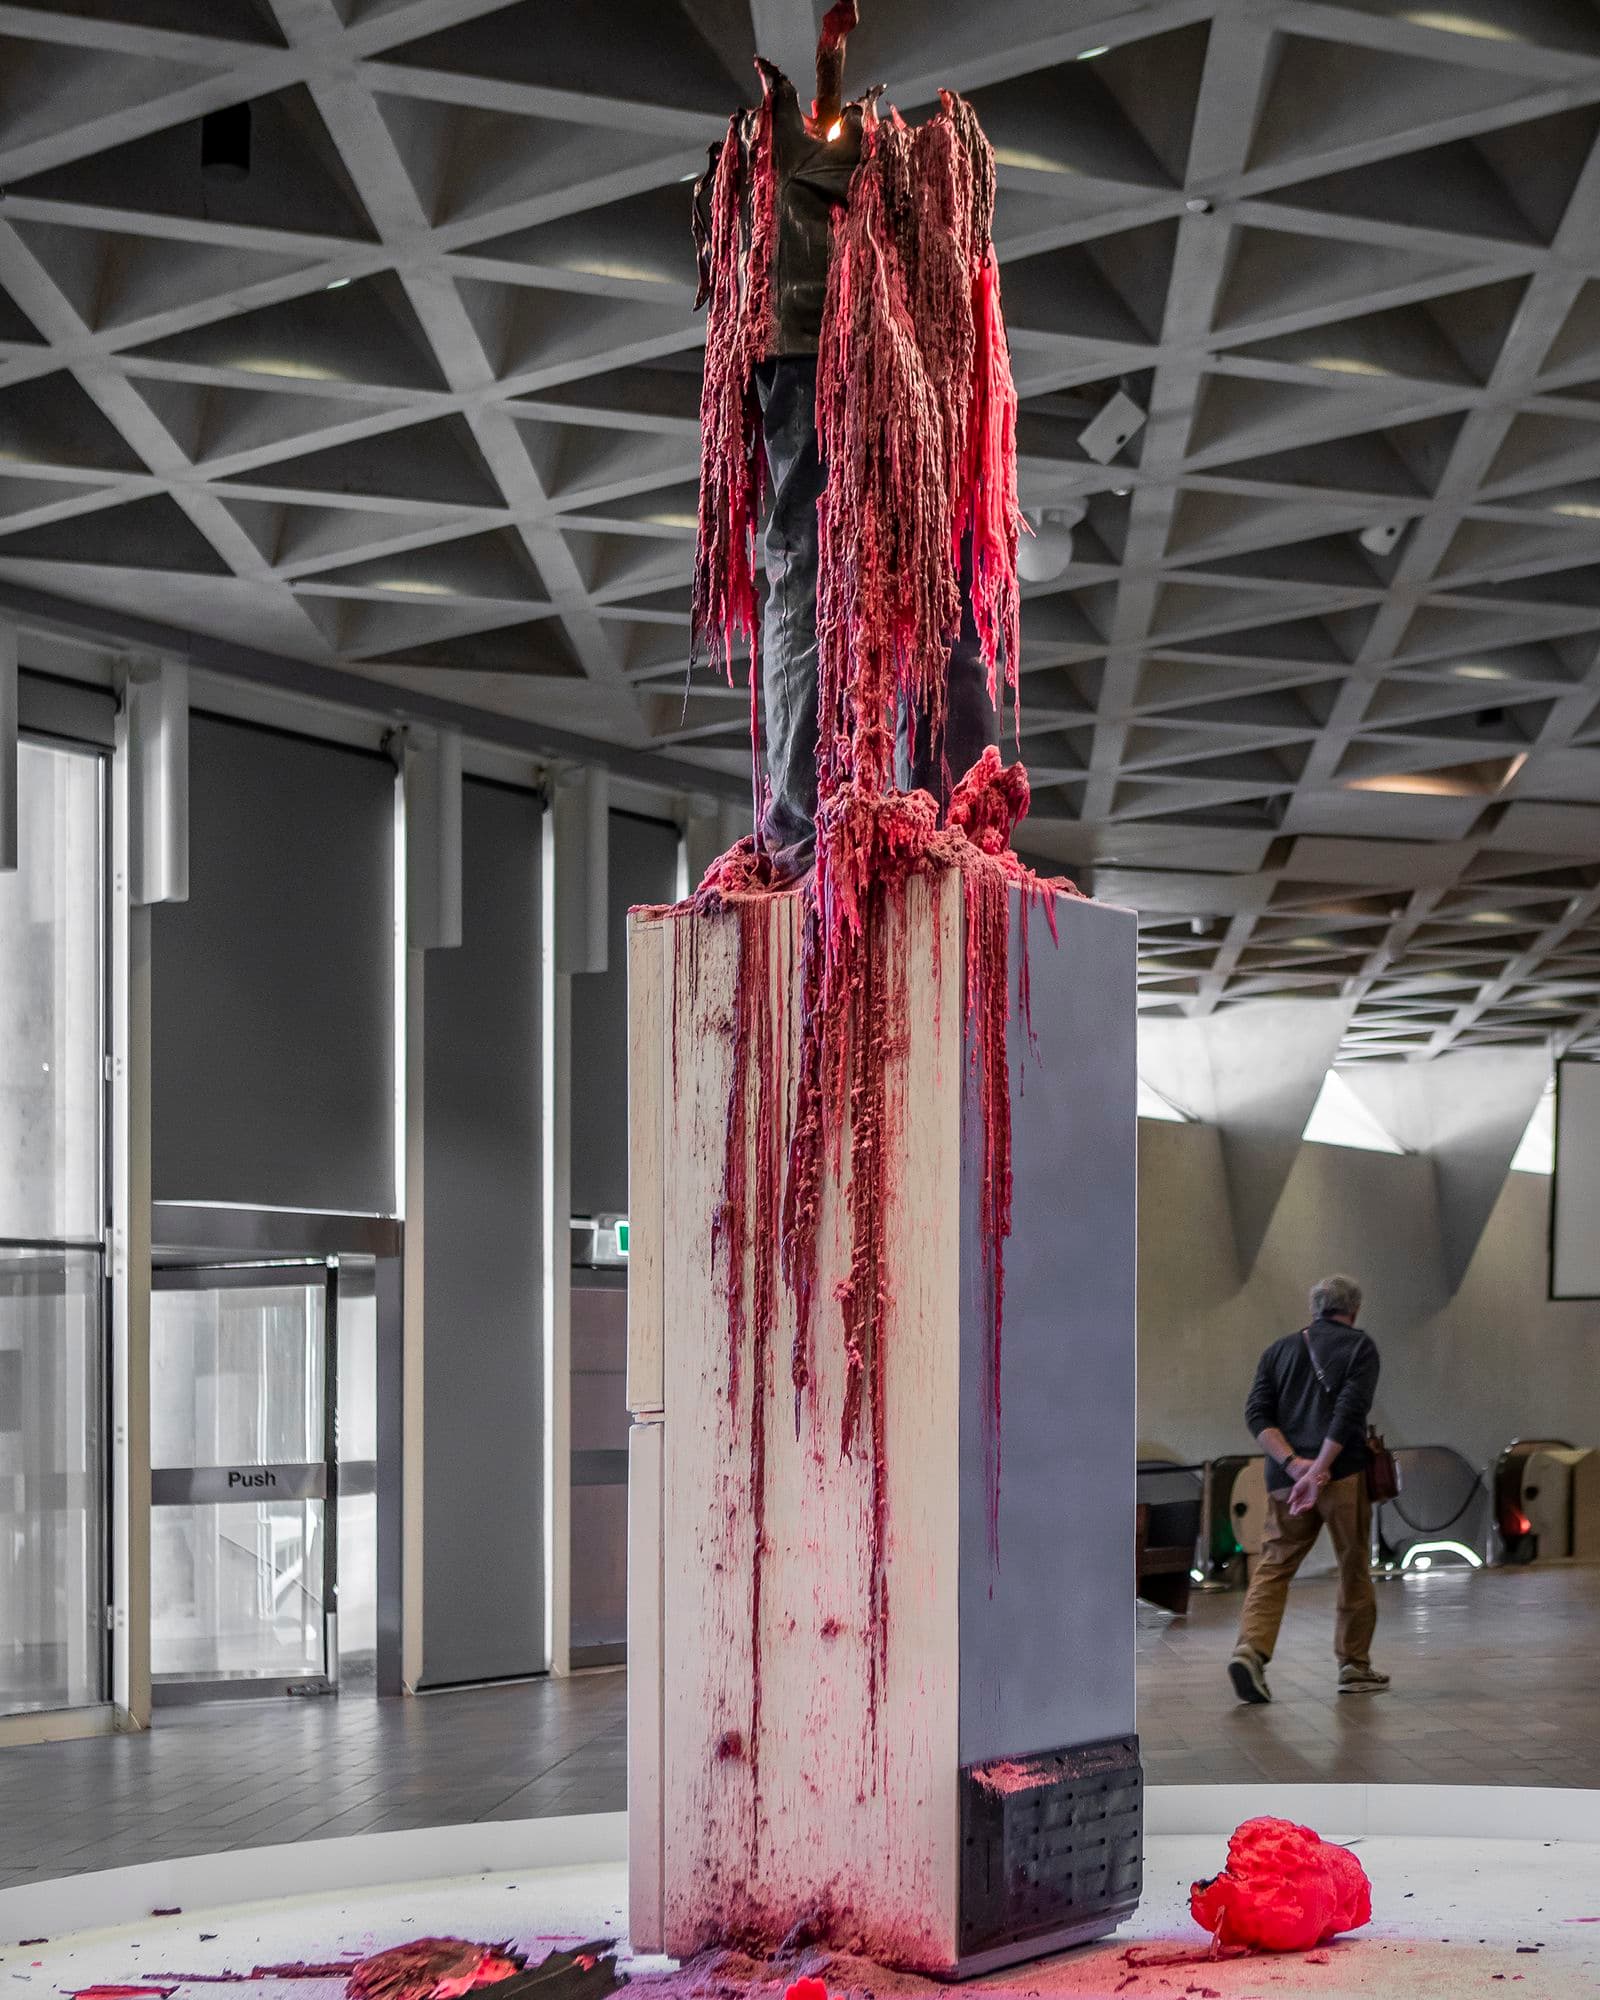 a tall wax sculpture of a man standing upon a fridge is half-melted, with pink and grey wax dripping  down onto the fridge and floor